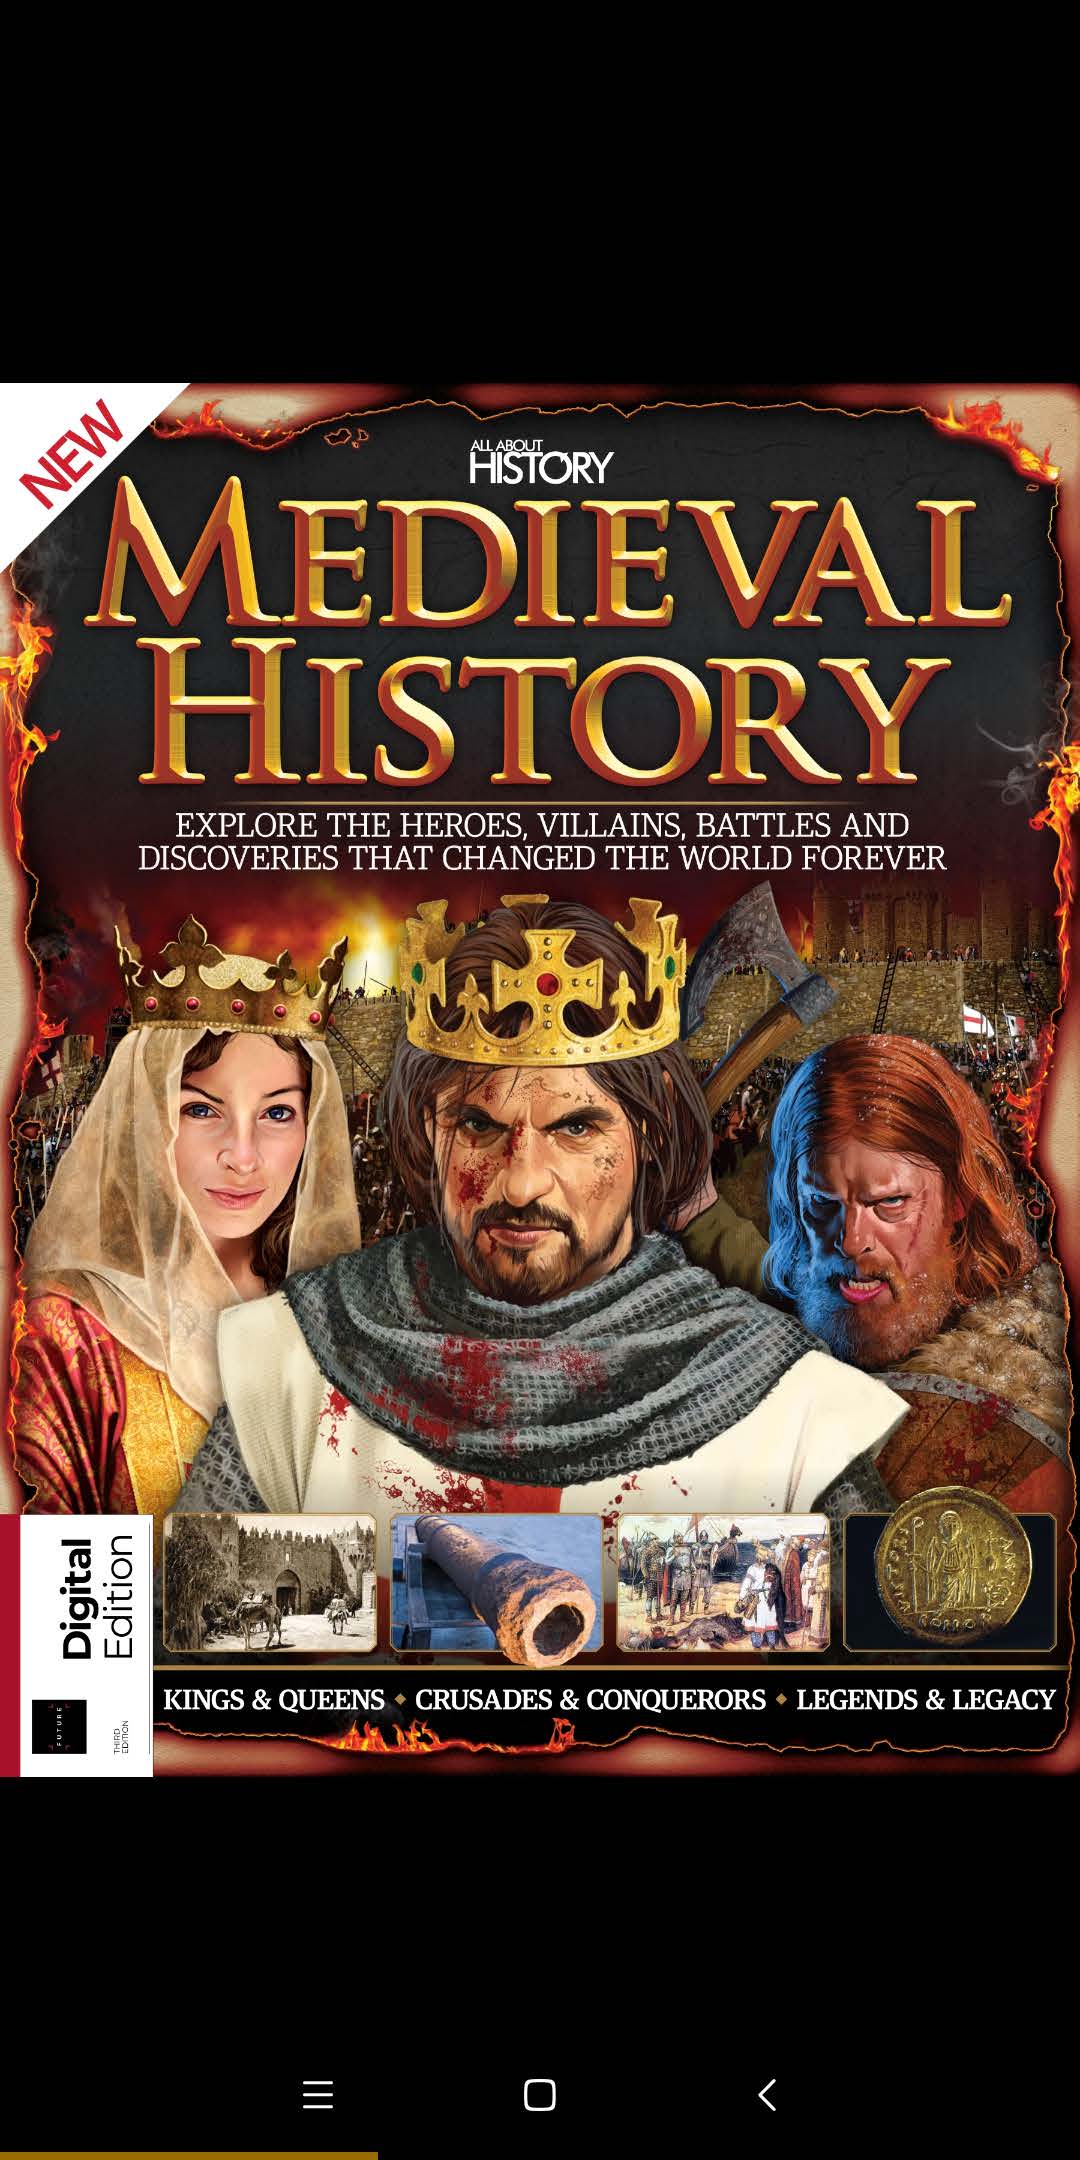 All_About_History_-_Book_of_Medieval_History_-_2018.jpg